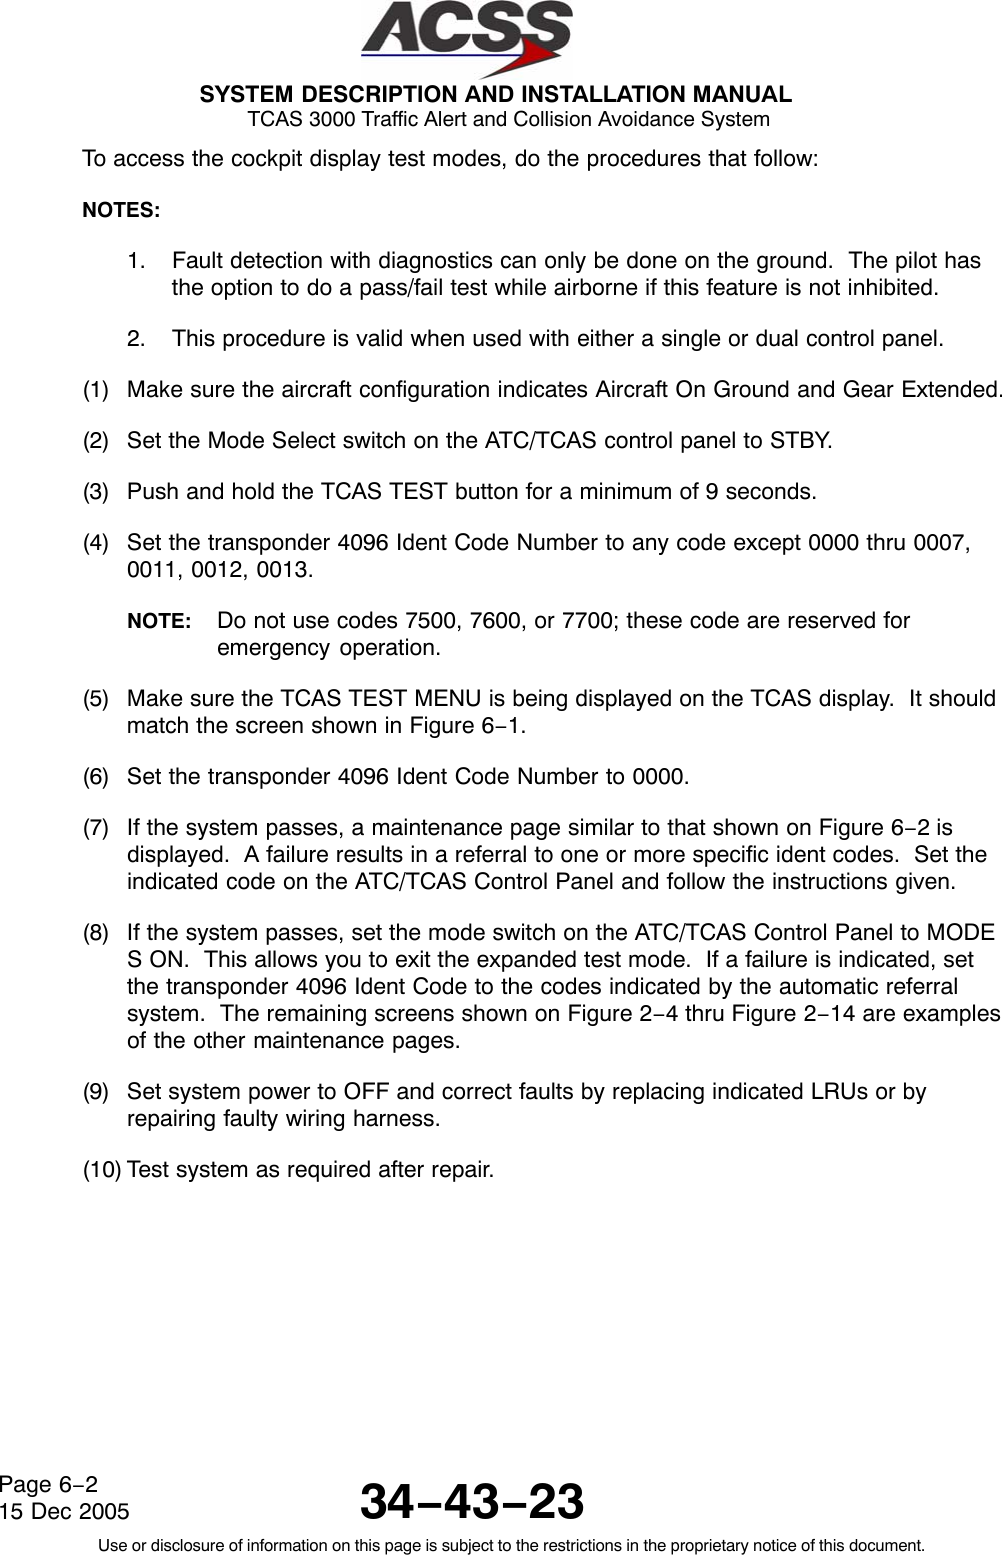  SYSTEM DESCRIPTION AND INSTALLATION MANUAL TCAS 3000 Traffic Alert and Collision Avoidance System34−43−23Use or disclosure of information on this page is subject to the restrictions in the proprietary notice of this document.Page 6−215 Dec 2005To access the cockpit display test modes, do the procedures that follow:NOTES:1. Fault detection with diagnostics can only be done on the ground.  The pilot hasthe option to do a pass/fail test while airborne if this feature is not inhibited.2. This procedure is valid when used with either a single or dual control panel.(1) Make sure the aircraft configuration indicates Aircraft On Ground and Gear Extended.(2) Set the Mode Select switch on the ATC/TCAS control panel to STBY.(3) Push and hold the TCAS TEST button for a minimum of 9 seconds.(4) Set the transponder 4096 Ident Code Number to any code except 0000 thru 0007,0011, 0012, 0013.NOTE: Do not use codes 7500, 7600, or 7700; these code are reserved foremergency operation.(5) Make sure the TCAS TEST MENU is being displayed on the TCAS display.  It shouldmatch the screen shown in Figure 6−1.(6) Set the transponder 4096 Ident Code Number to 0000.(7) If the system passes, a maintenance page similar to that shown on Figure 6−2 isdisplayed.  A failure results in a referral to one or more specific ident codes.  Set theindicated code on the ATC/TCAS Control Panel and follow the instructions given.(8) If the system passes, set the mode switch on the ATC/TCAS Control Panel to MODES ON.  This allows you to exit the expanded test mode.  If a failure is indicated, setthe transponder 4096 Ident Code to the codes indicated by the automatic referralsystem.  The remaining screens shown on Figure 2−4 thru Figure 2−14 are examplesof the other maintenance pages.(9) Set system power to OFF and correct faults by replacing indicated LRUs or byrepairing faulty wiring harness.(10) Test system as required after repair.